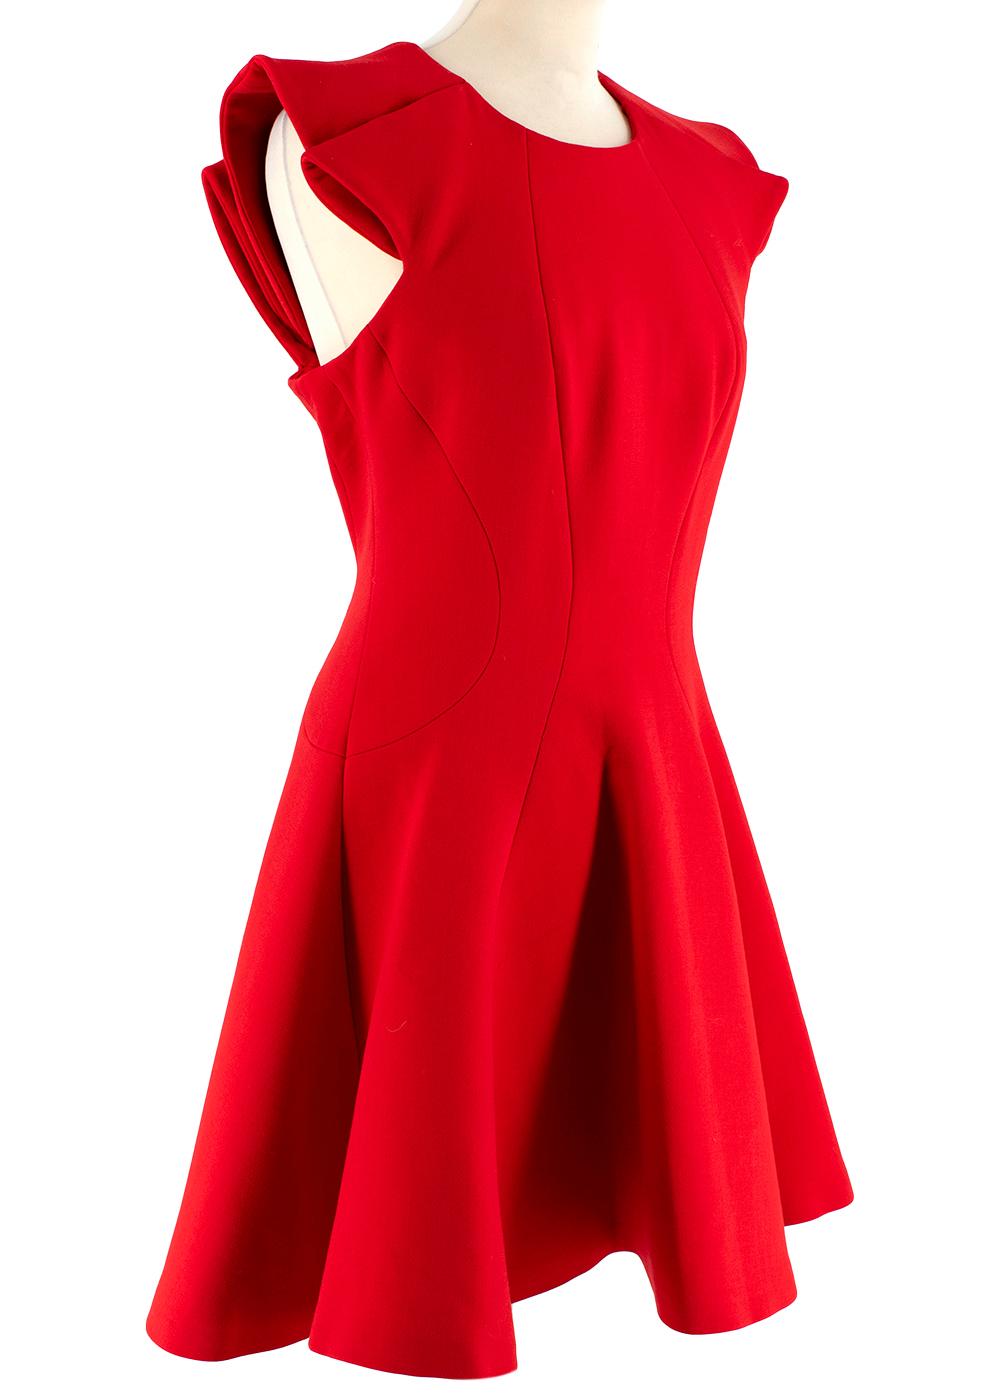 Alexander McQueen Red Fit and Flare Mini Dress

- Fit and flare skater dress
- Mid weight material
- Contour seams
- Rounded neck
- Rose petal inspired sleeves
- Hidden back zip
- Fully lined
- Slight stretch

Materials:
Poly blend
Silk lining

Made